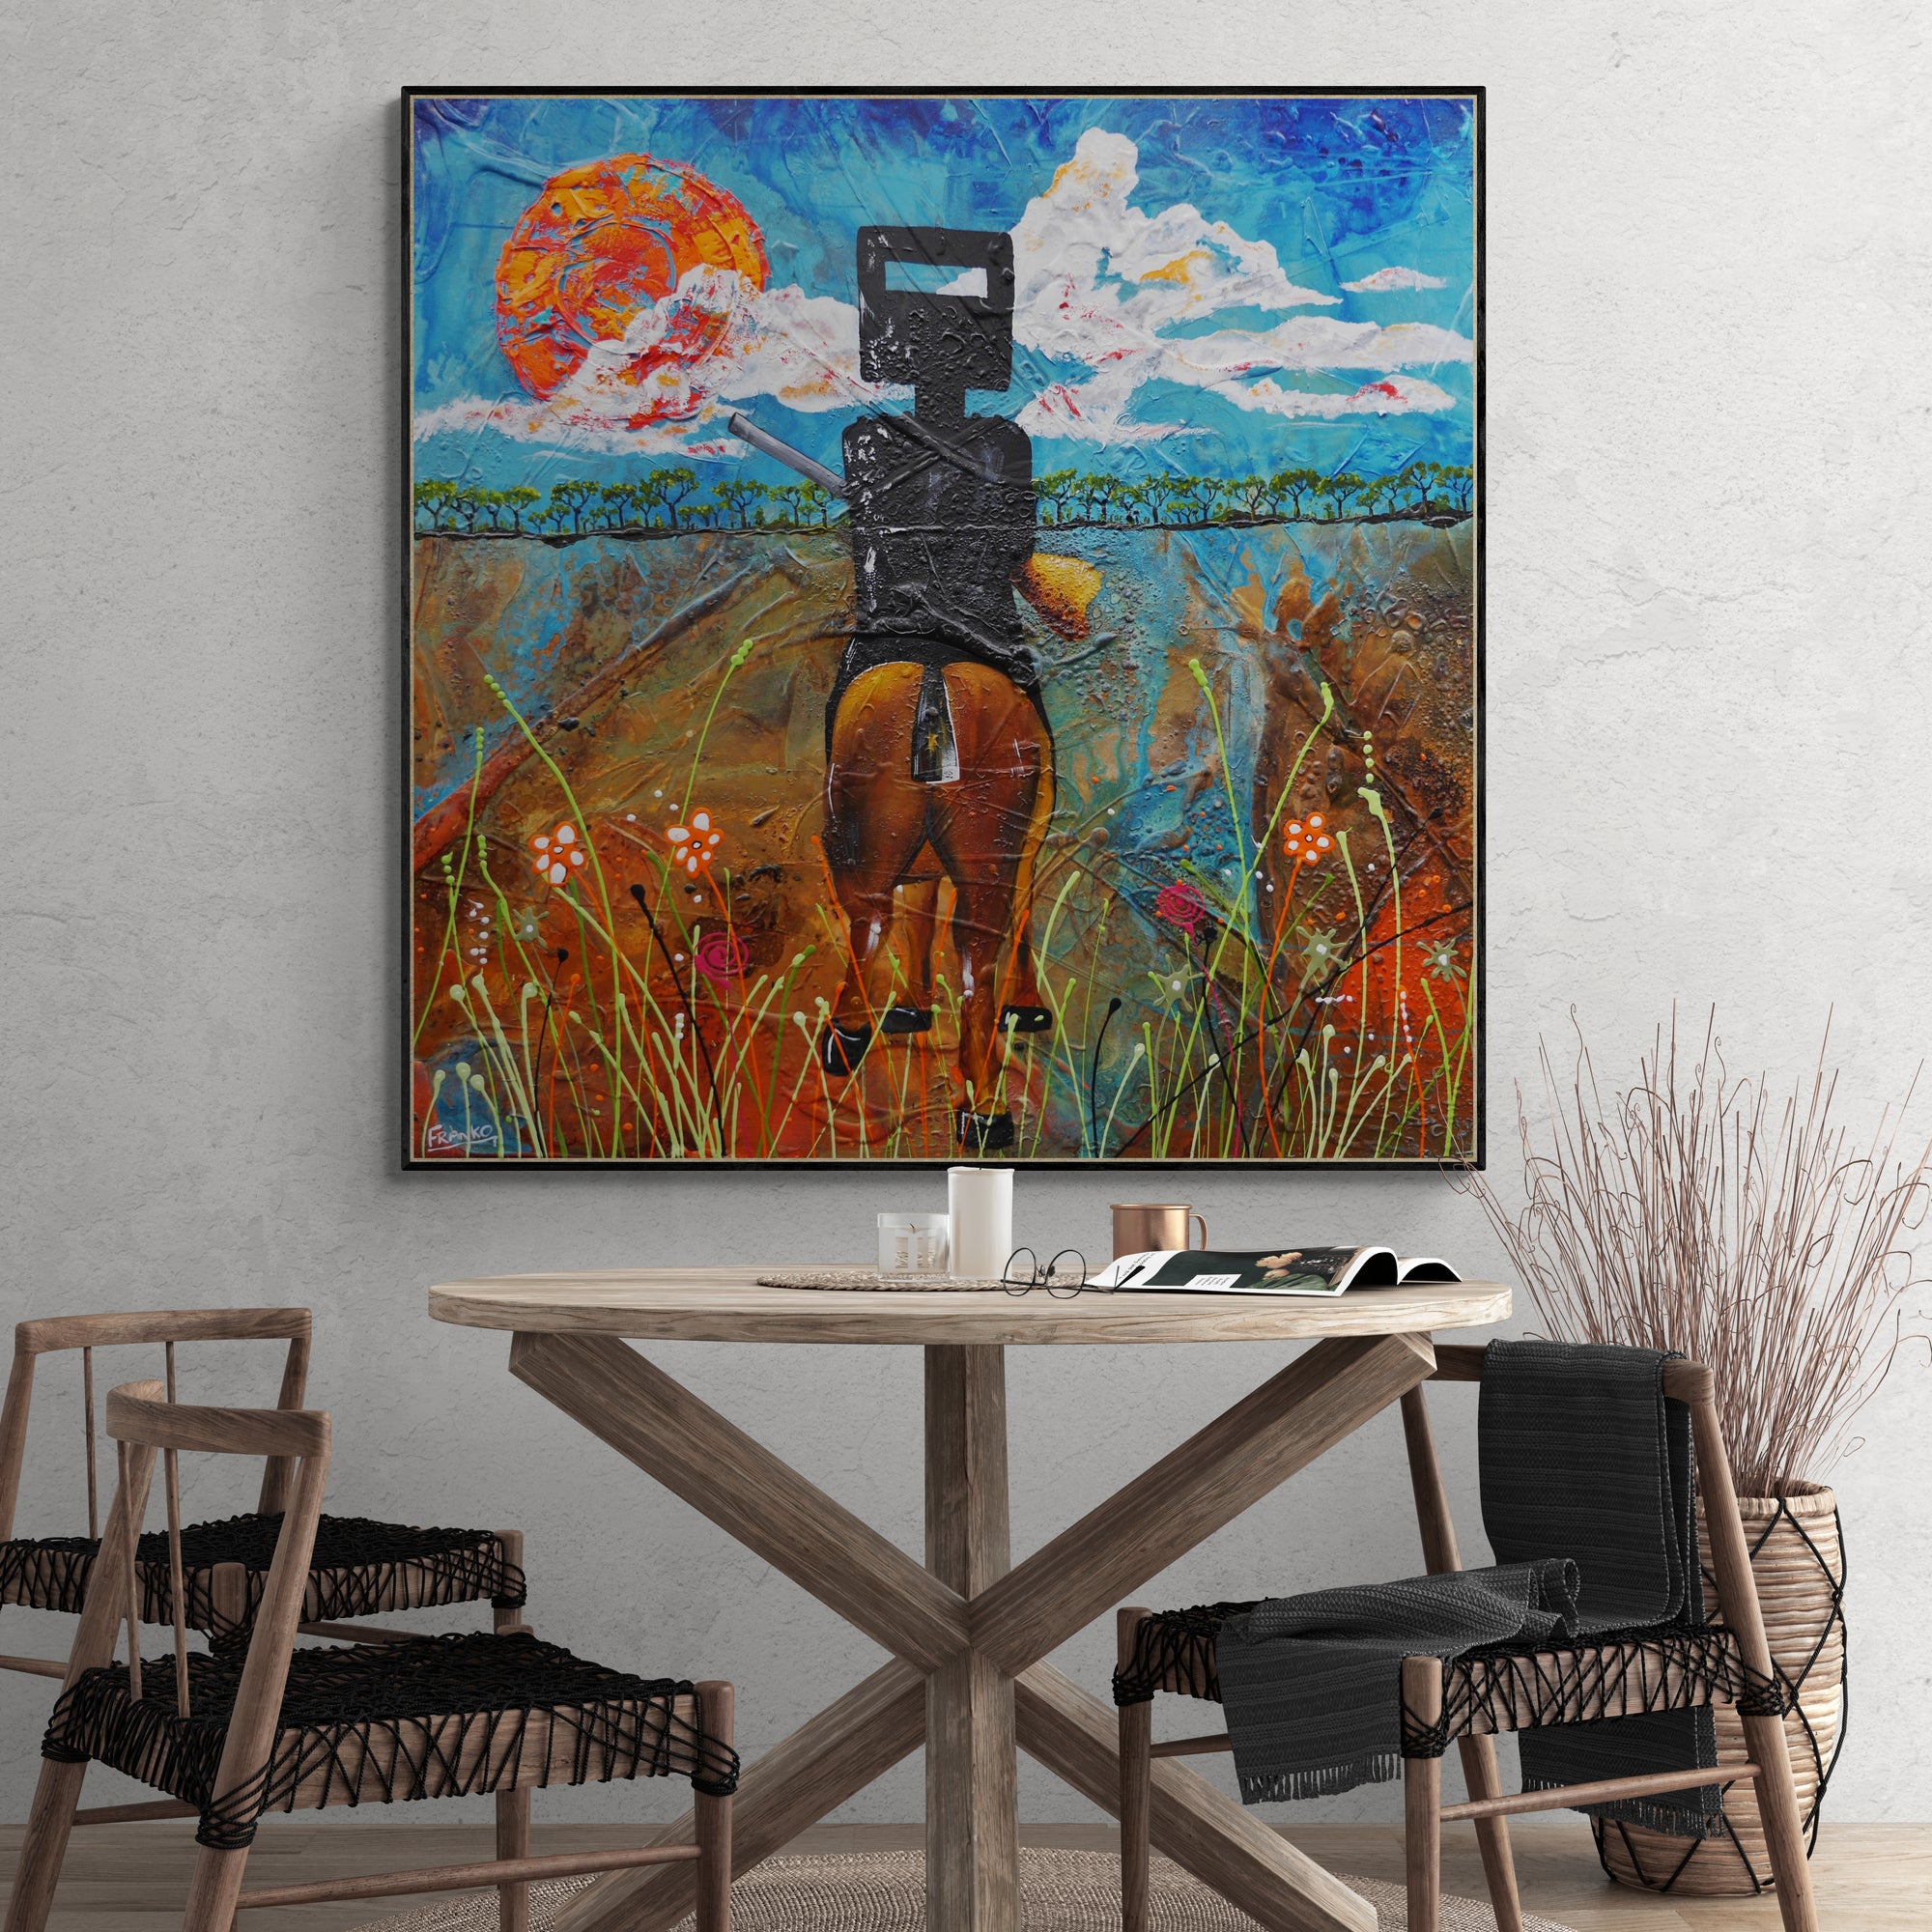 Summer Ned 120cm x 120cm Ned Kelly Abstract Realism Textured Painting (SOLD)